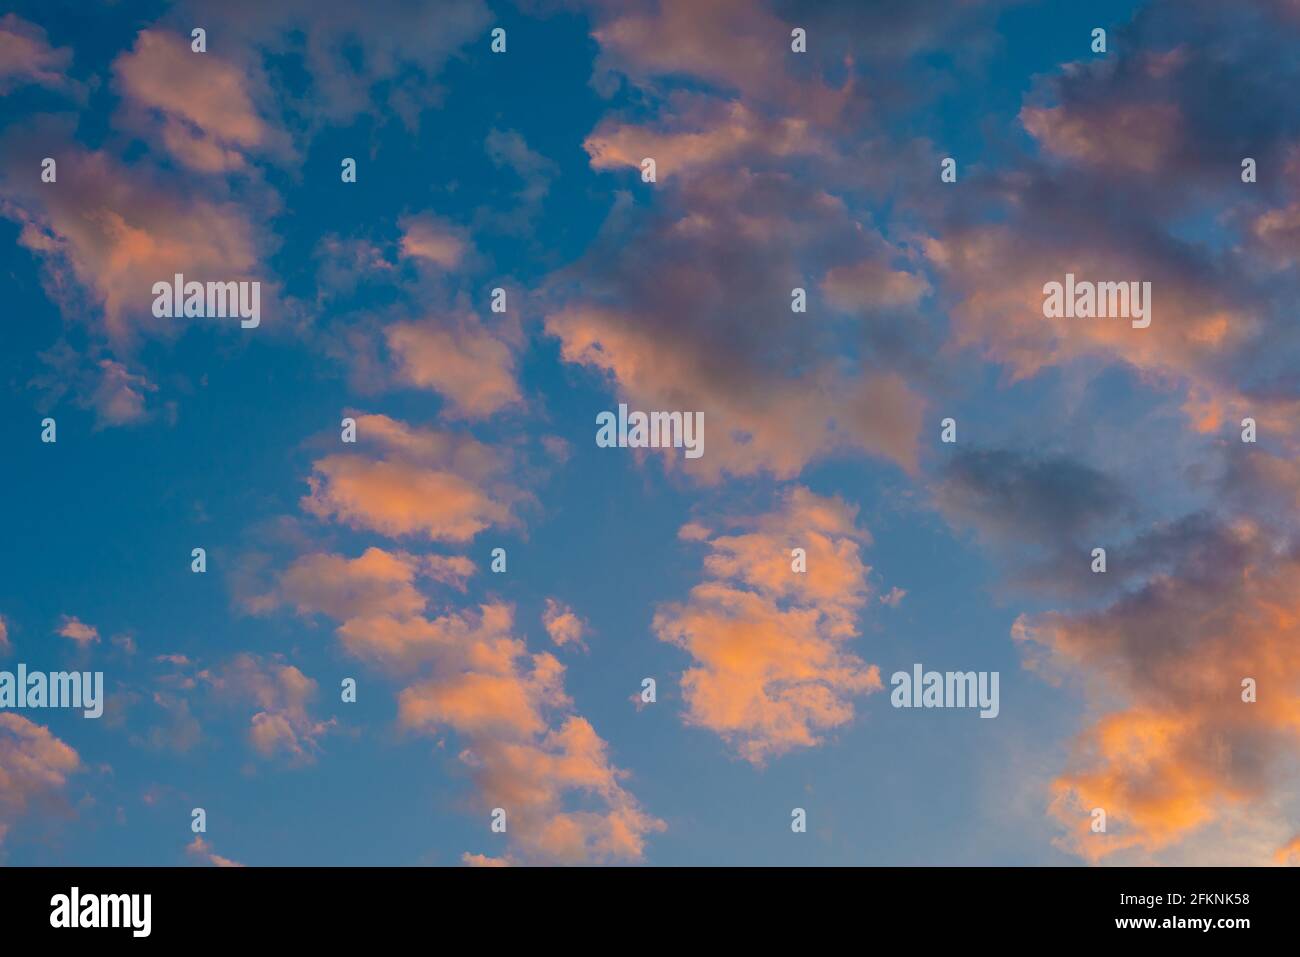 scenic sunrise cloudscape sky with pink black and white coloured cumulus cloud formation in a pastel blue sky. Sunset or sunrise background image Stock Photo